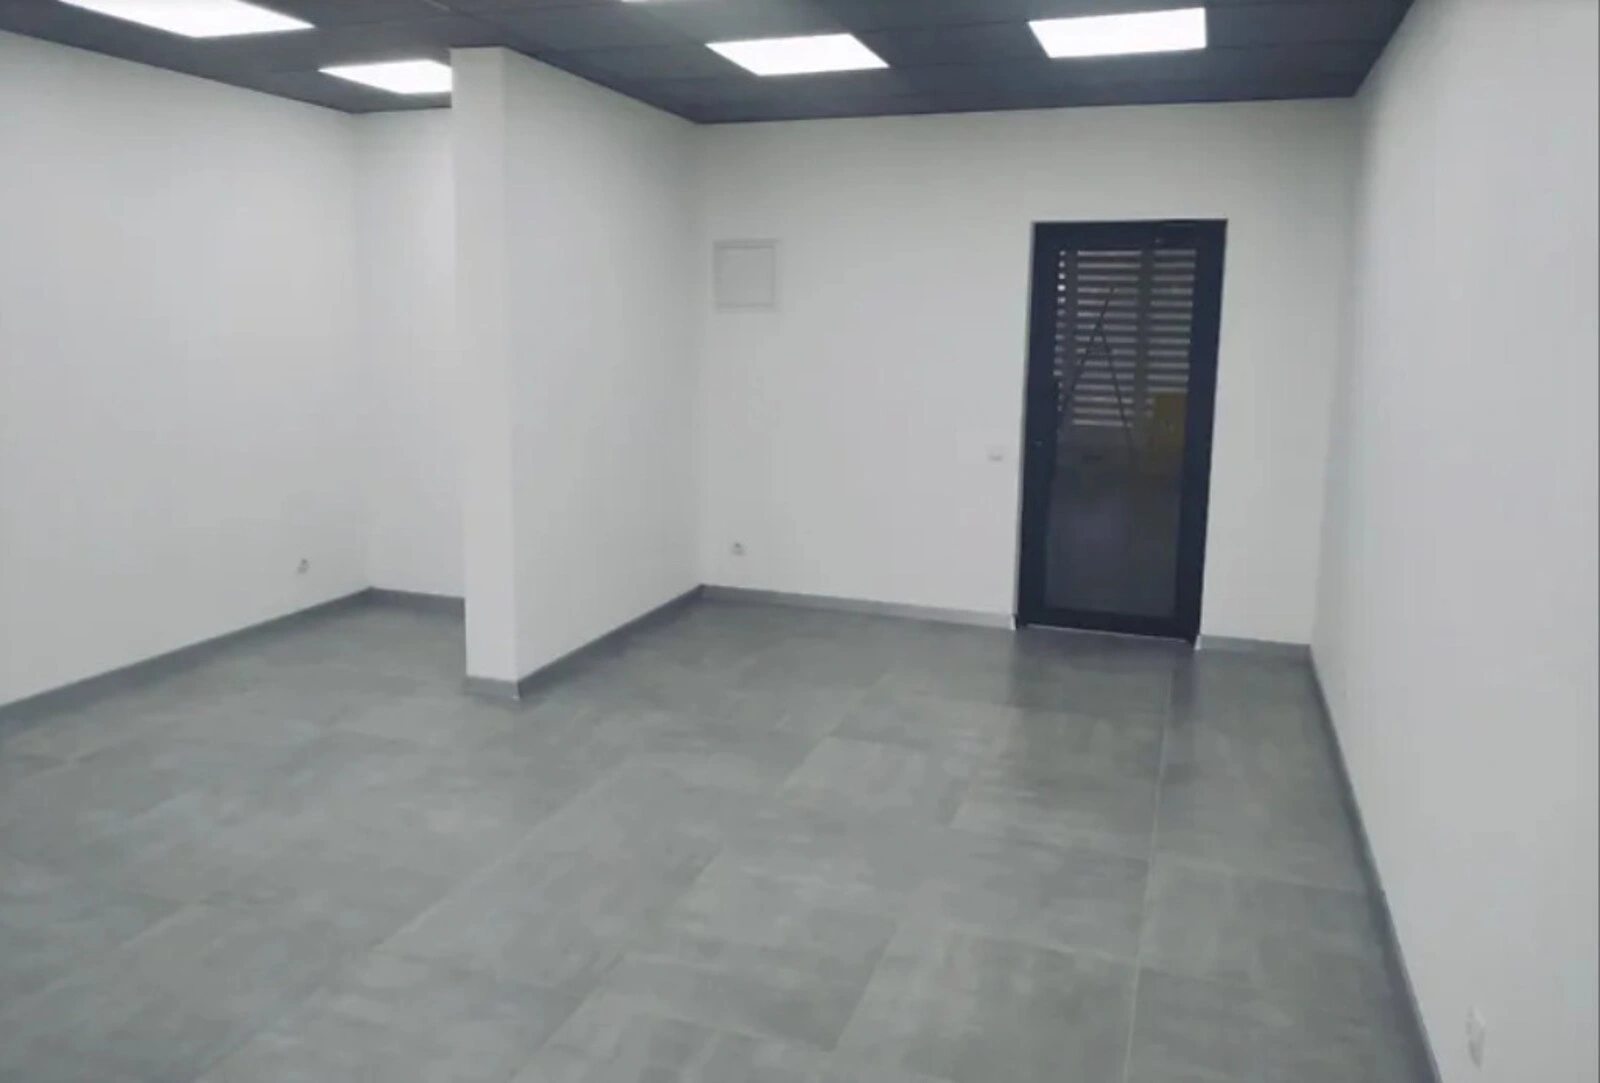 Real estate for sale for commercial purposes. 29 m², 2nd floor/2 floors. Vostochnyy, Ternopil. 